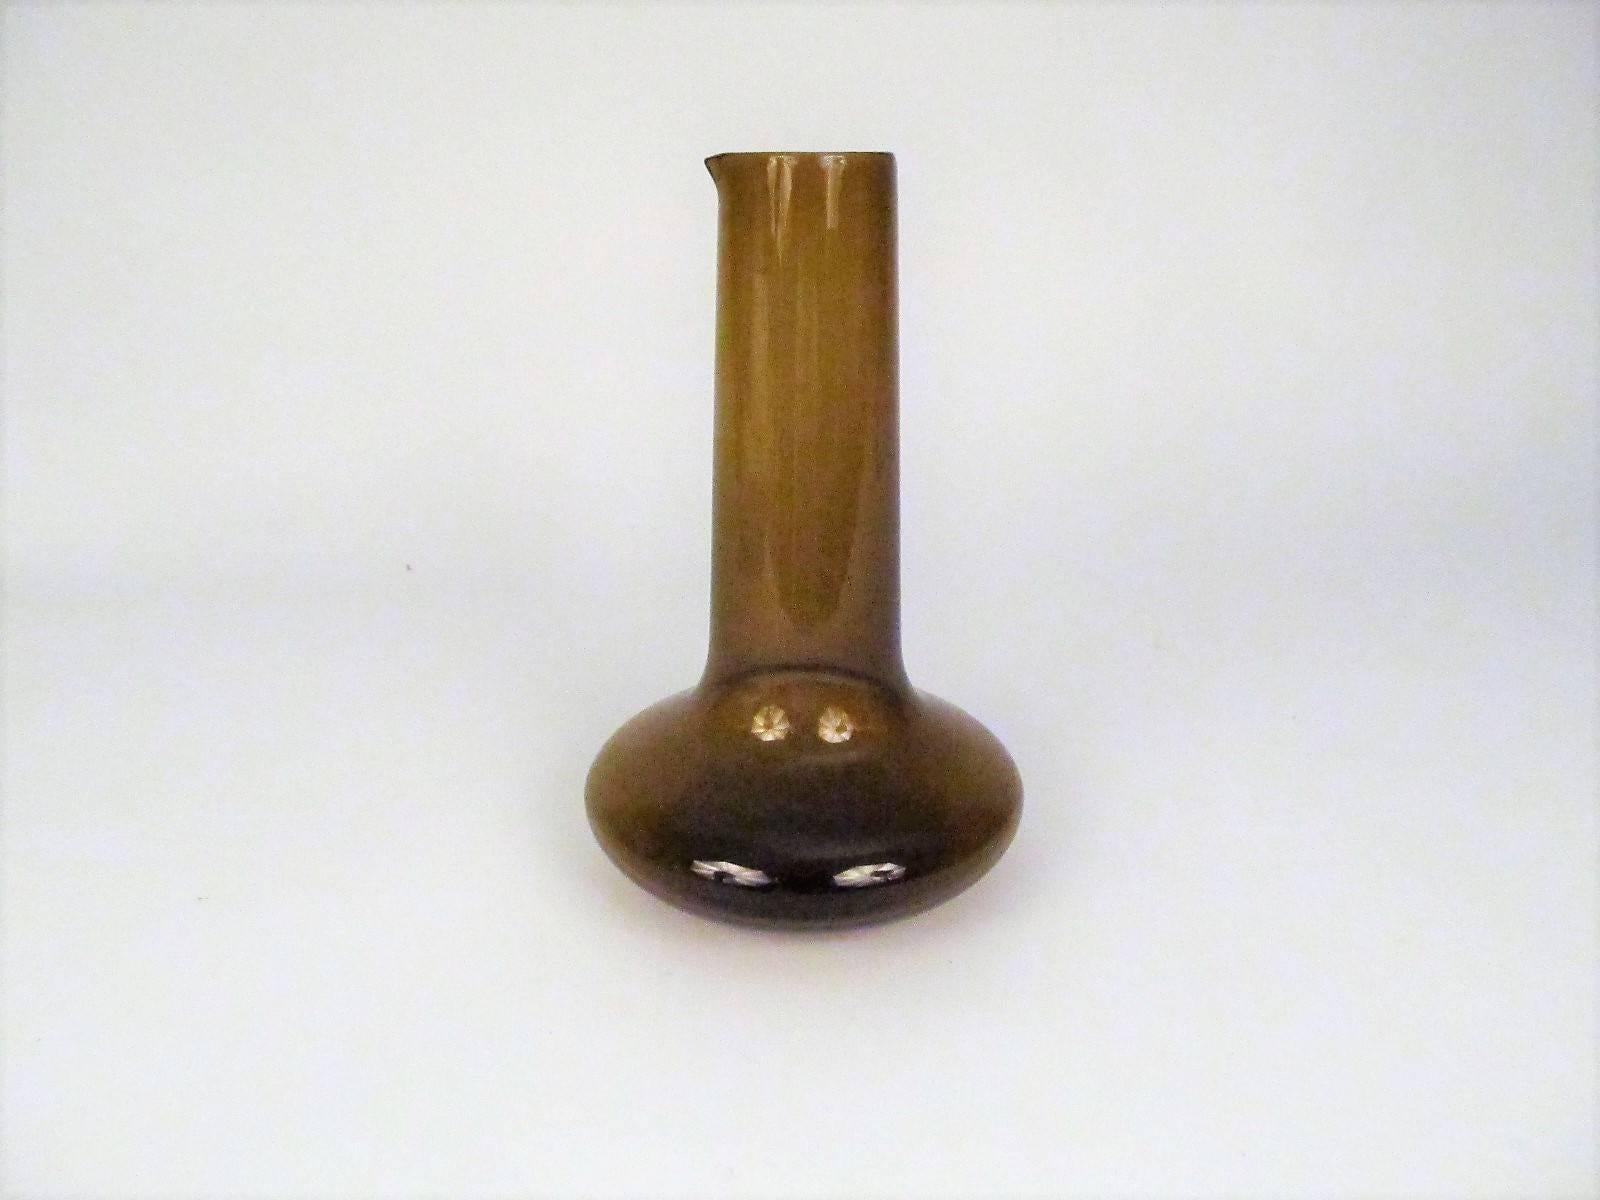 A distinctively elegant and organic form that just asks to be picked up. Although it has a spout, and is obviously a carafe, the word vase also comes to mind.

Signed on the bottom with the initials 